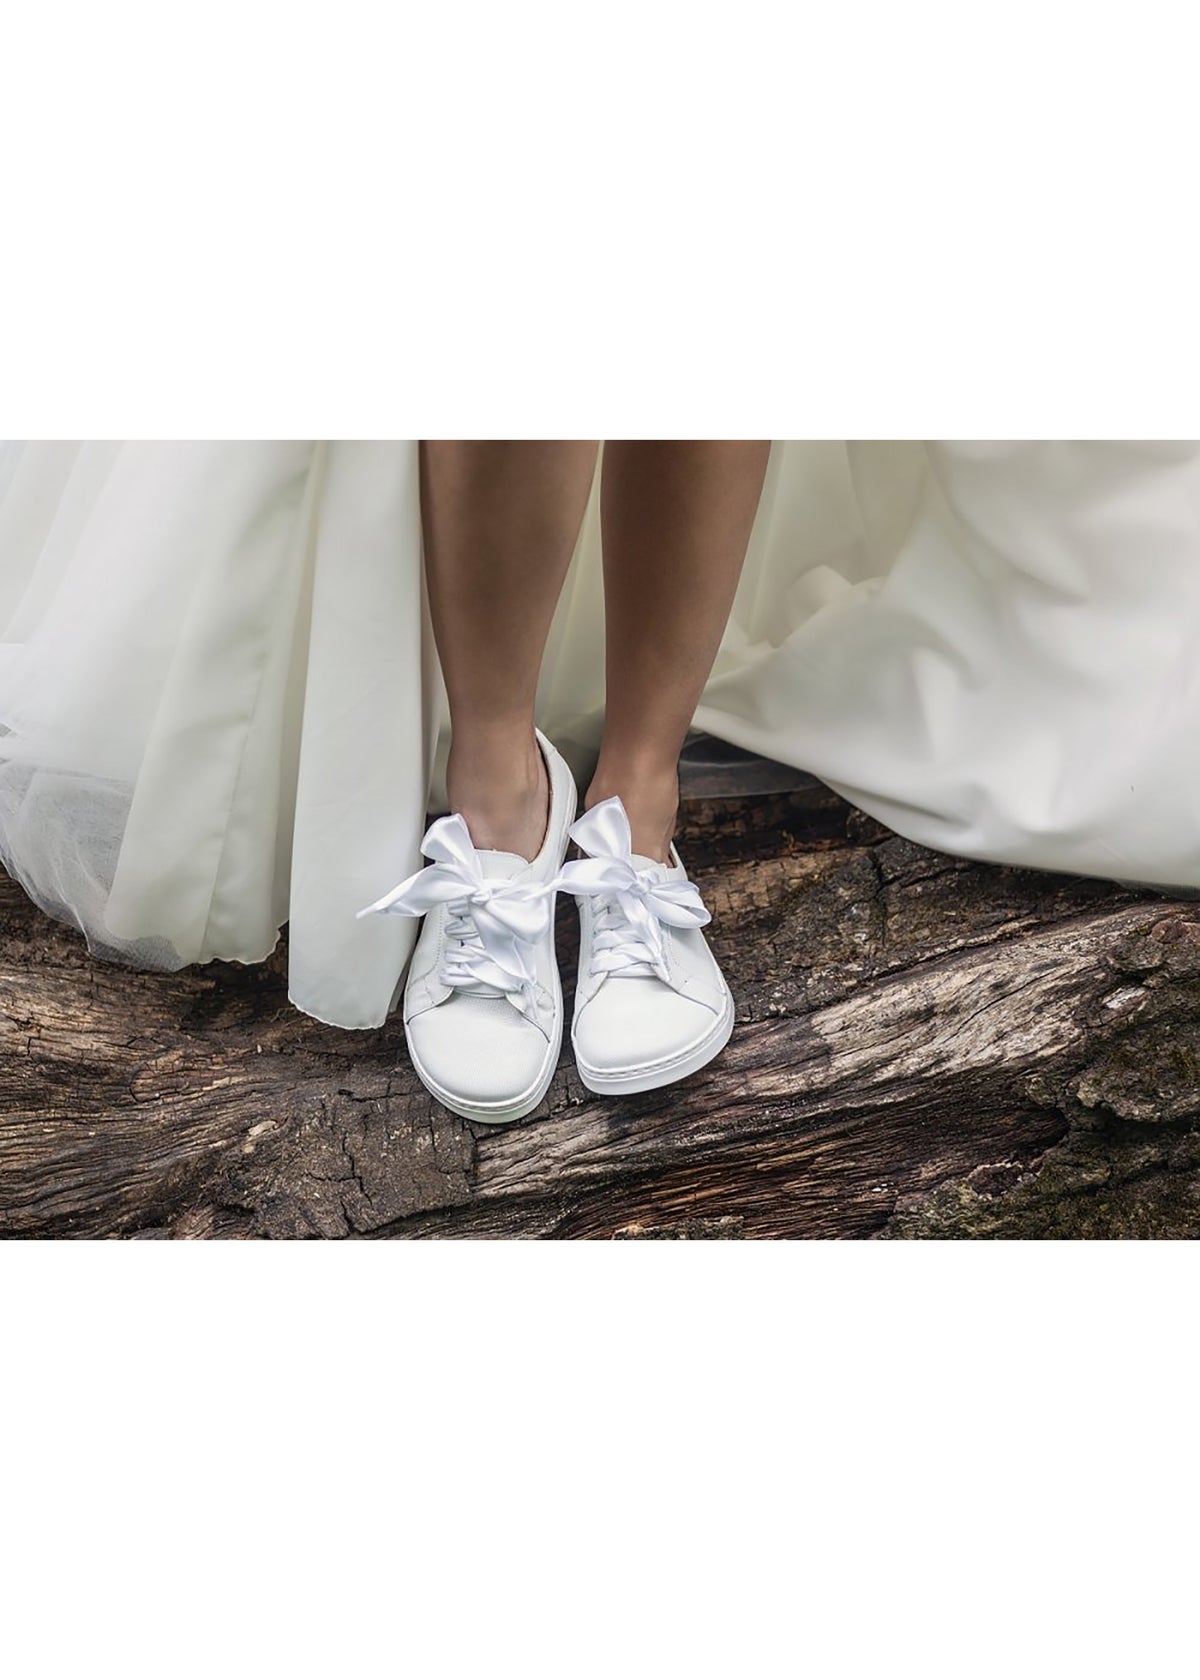 Barefoot shoes, Low-top sneakers - Celebrate Day, white